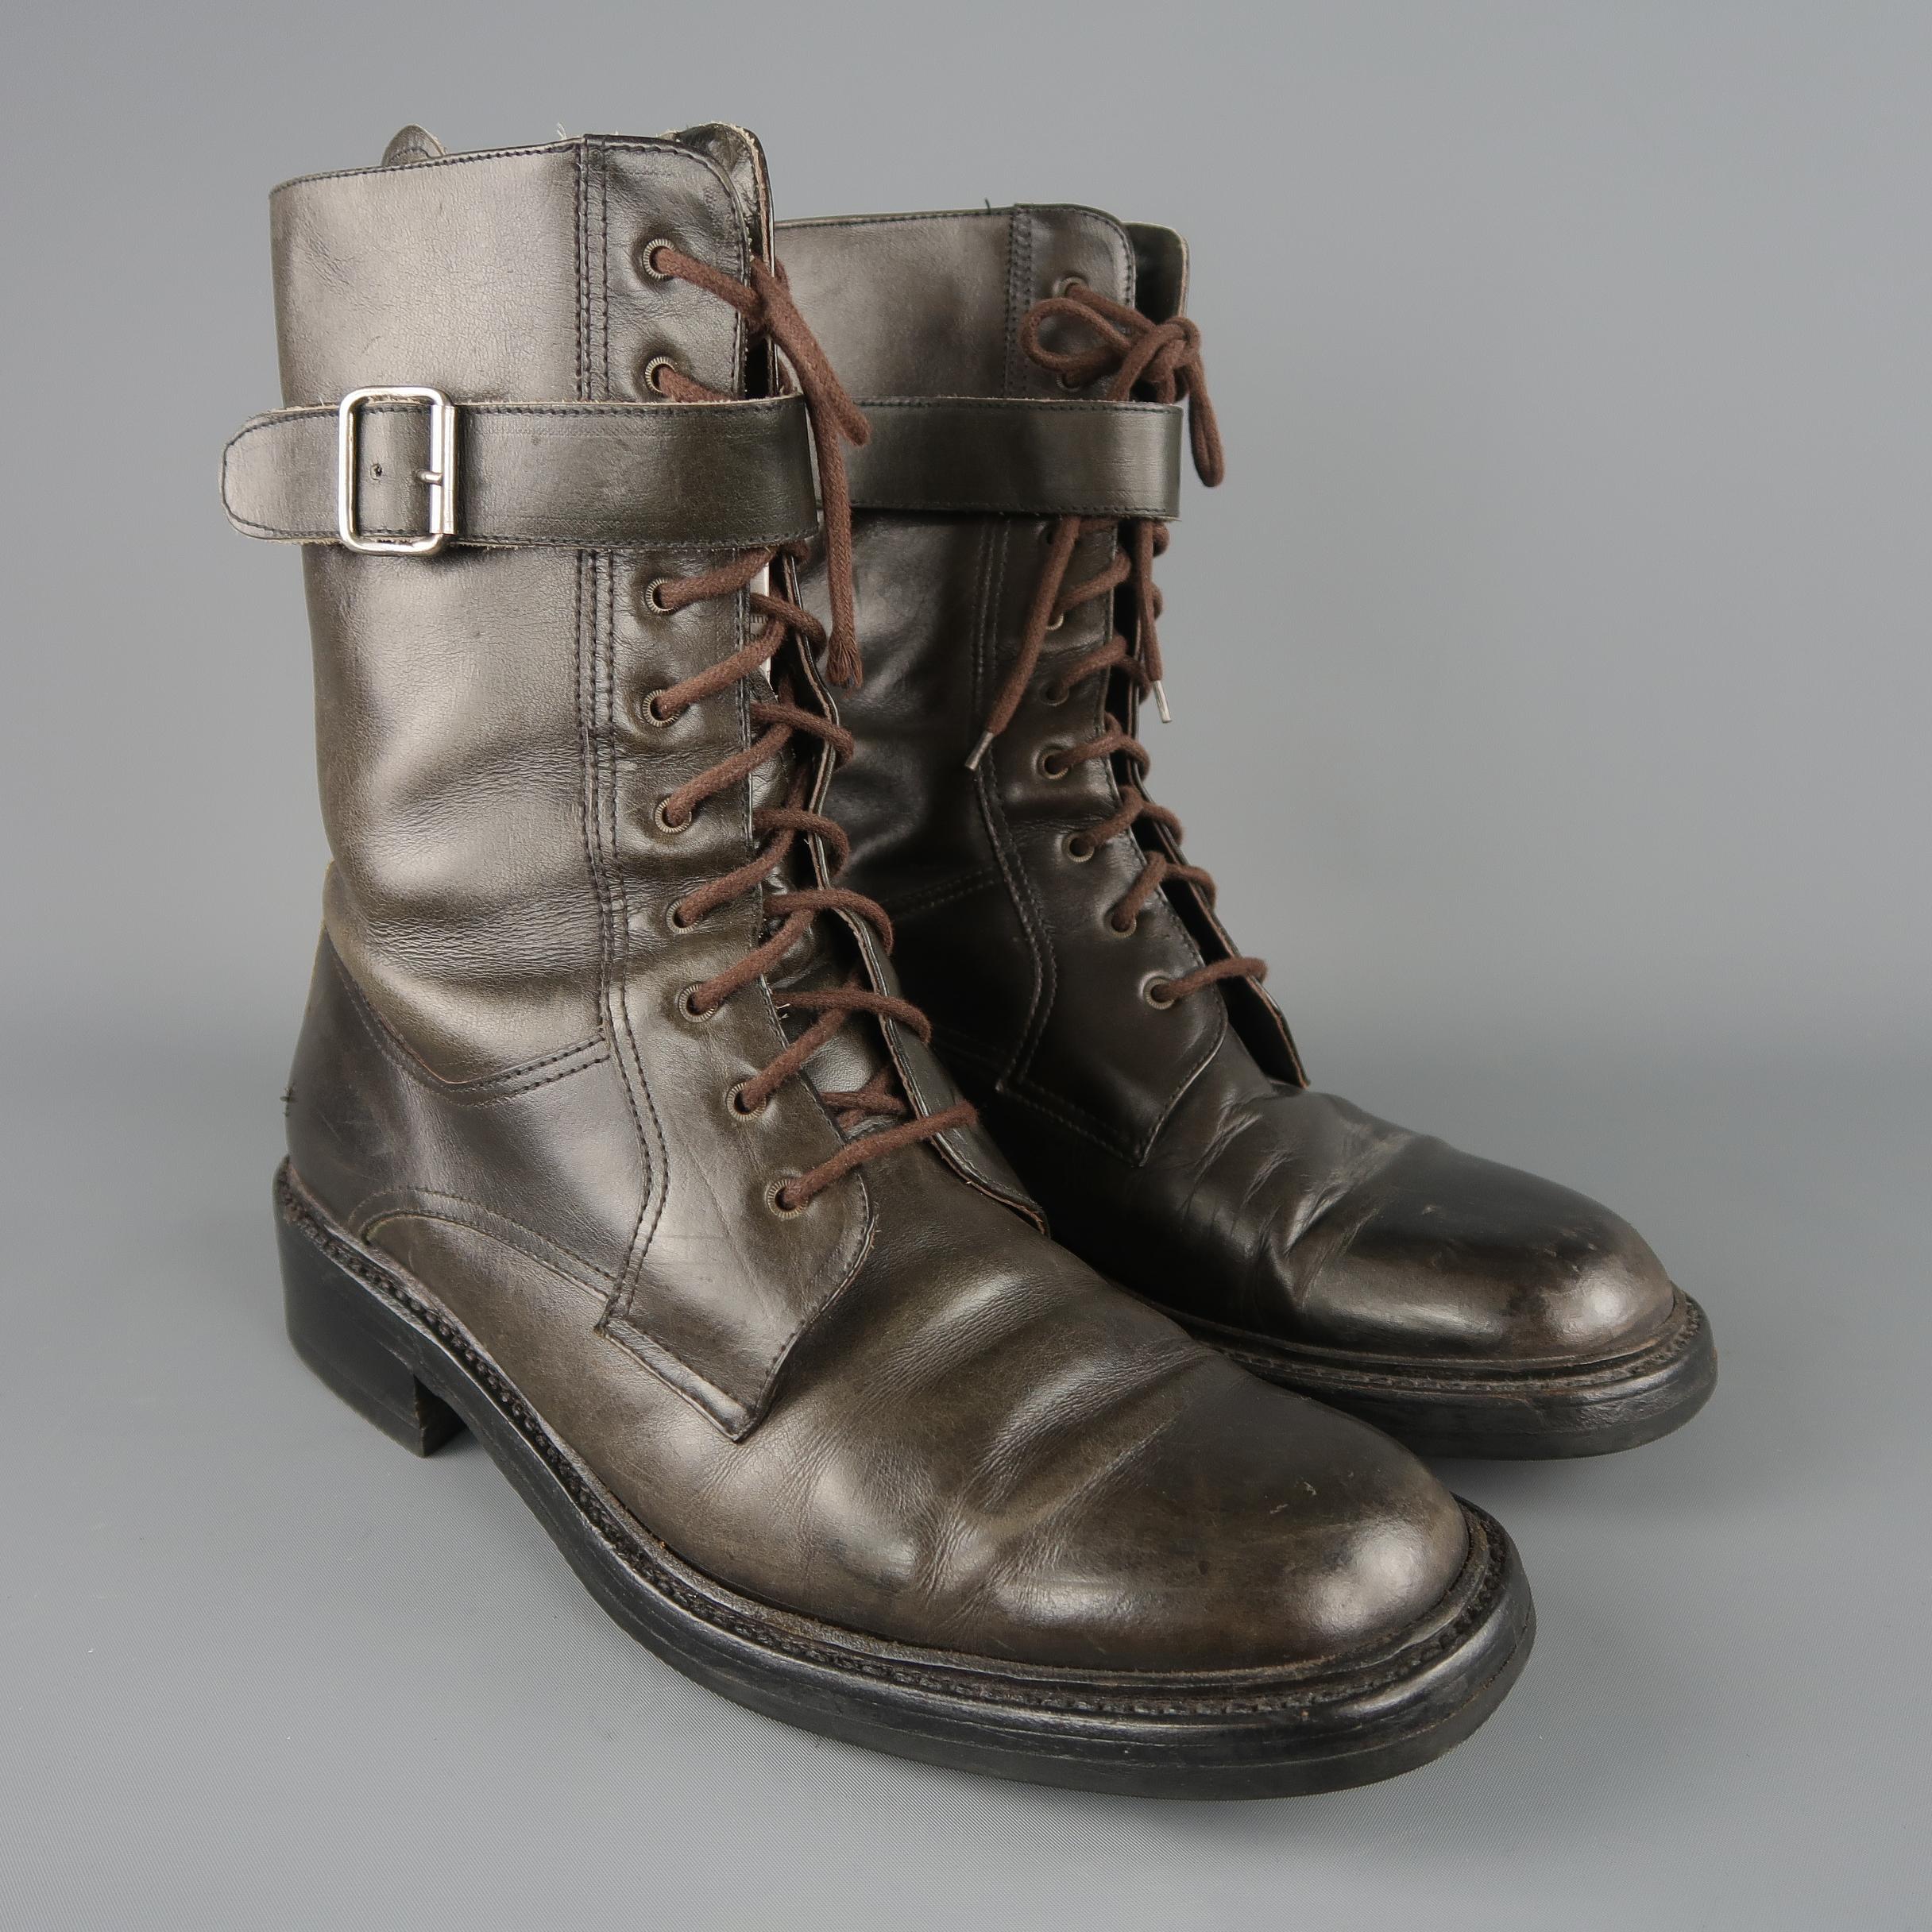 Prada combat style boots come in taupe leather with a rounded square toe, lace up front, stacked heeled sole, and buckled ankle strap. Logos worn of. Made in Italy.
 
Good Pre-Owned Condition.
Marked: (no size)
 
Measurements:
 
Length: 9 in.